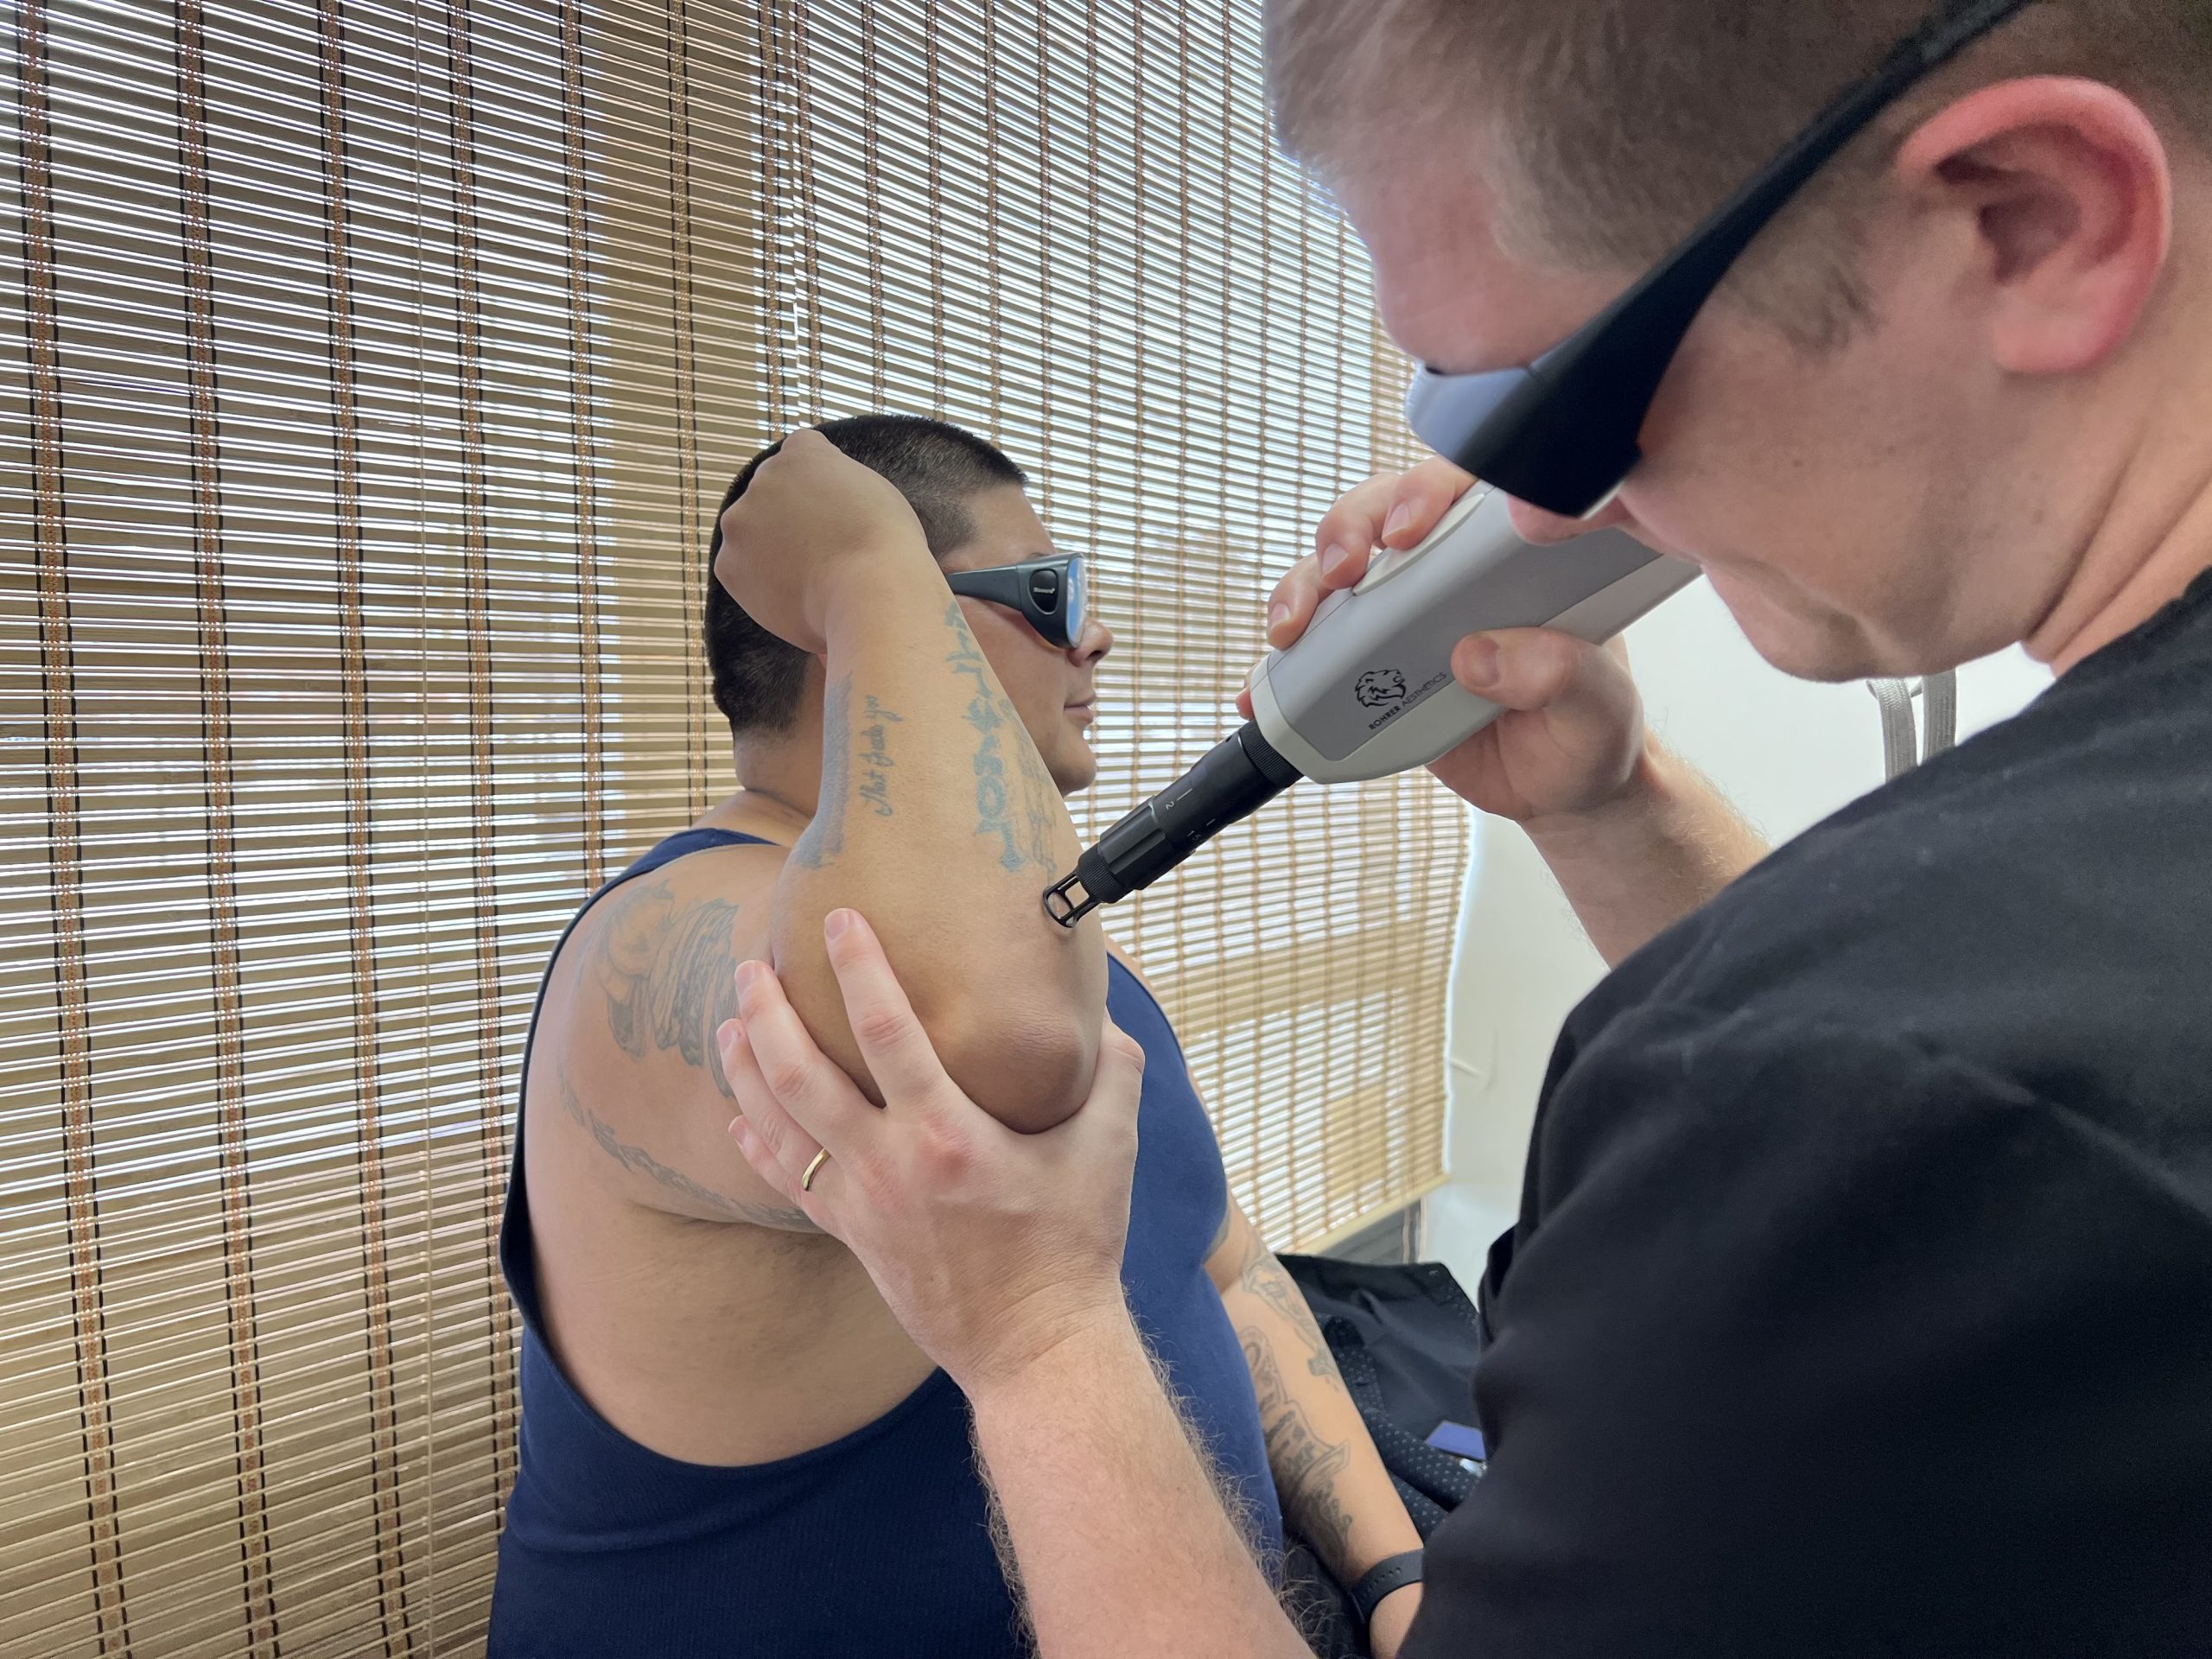 Beaumont dermatology residents remove tattoos to help people re-enter  society | Beaumont Health